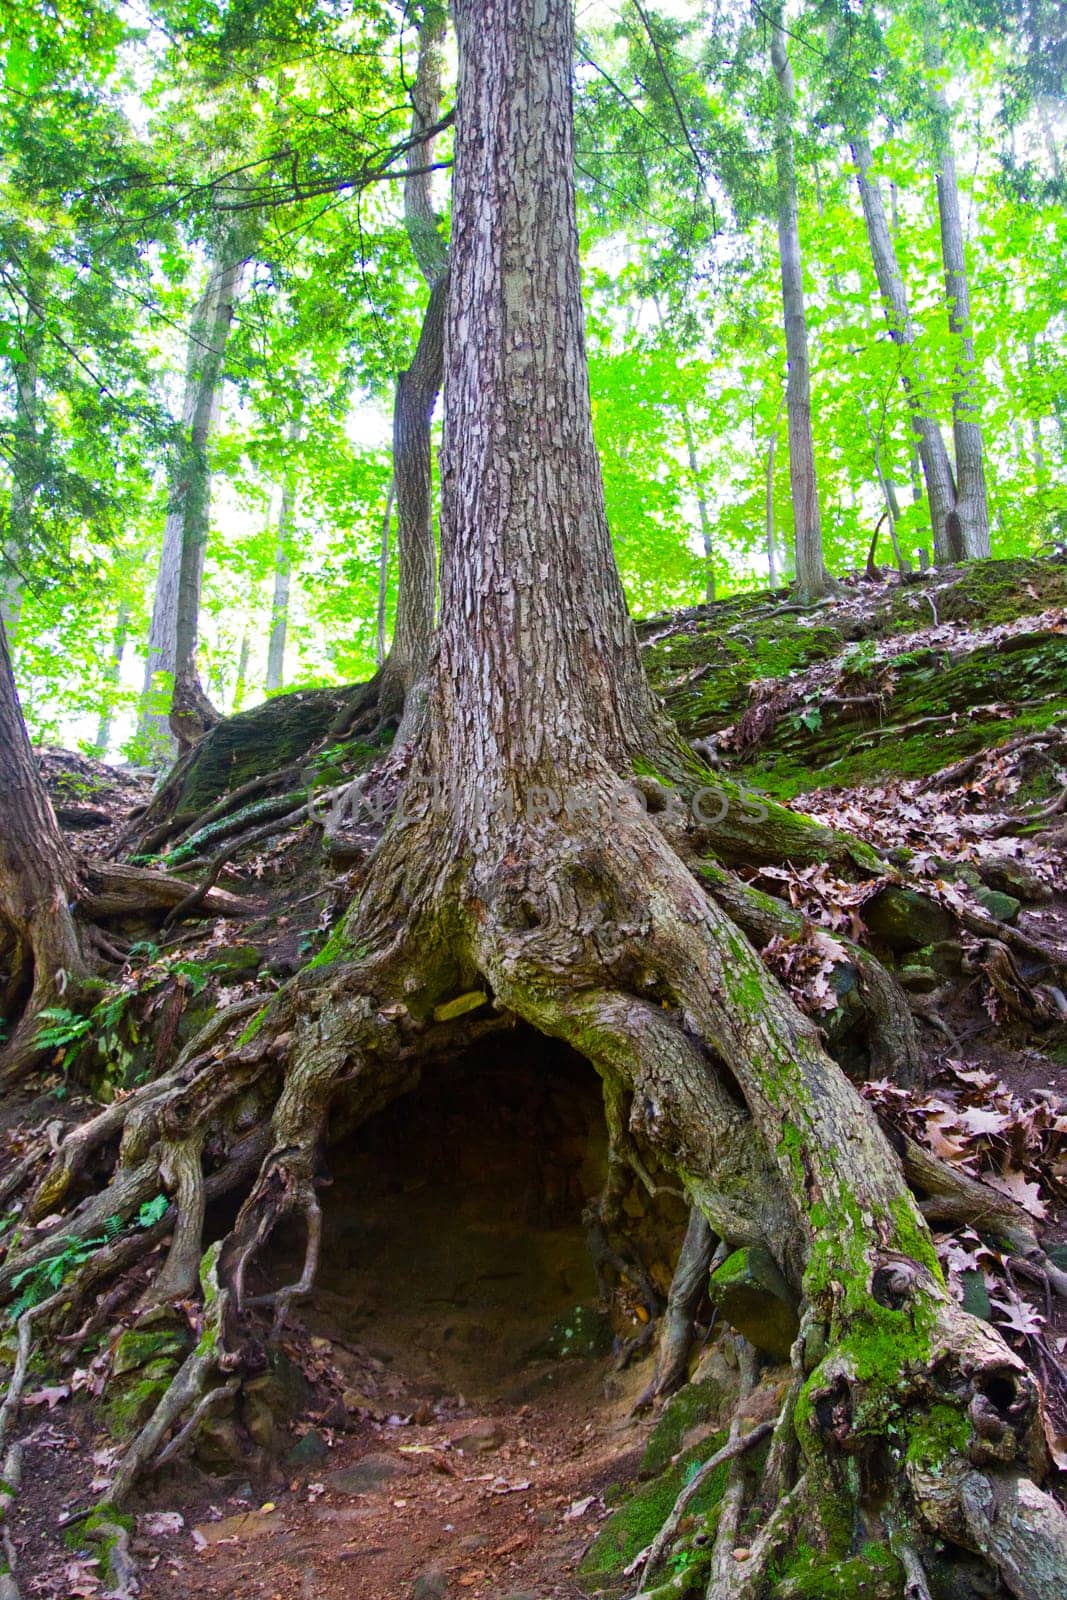 Enchanting forest scene showcasing a majestic mature tree with intricate root system creating a natural hollow. Lush foliage and dappled light add to the mystique. Location: Fitzgerald County Park, Lansing, Michigan.